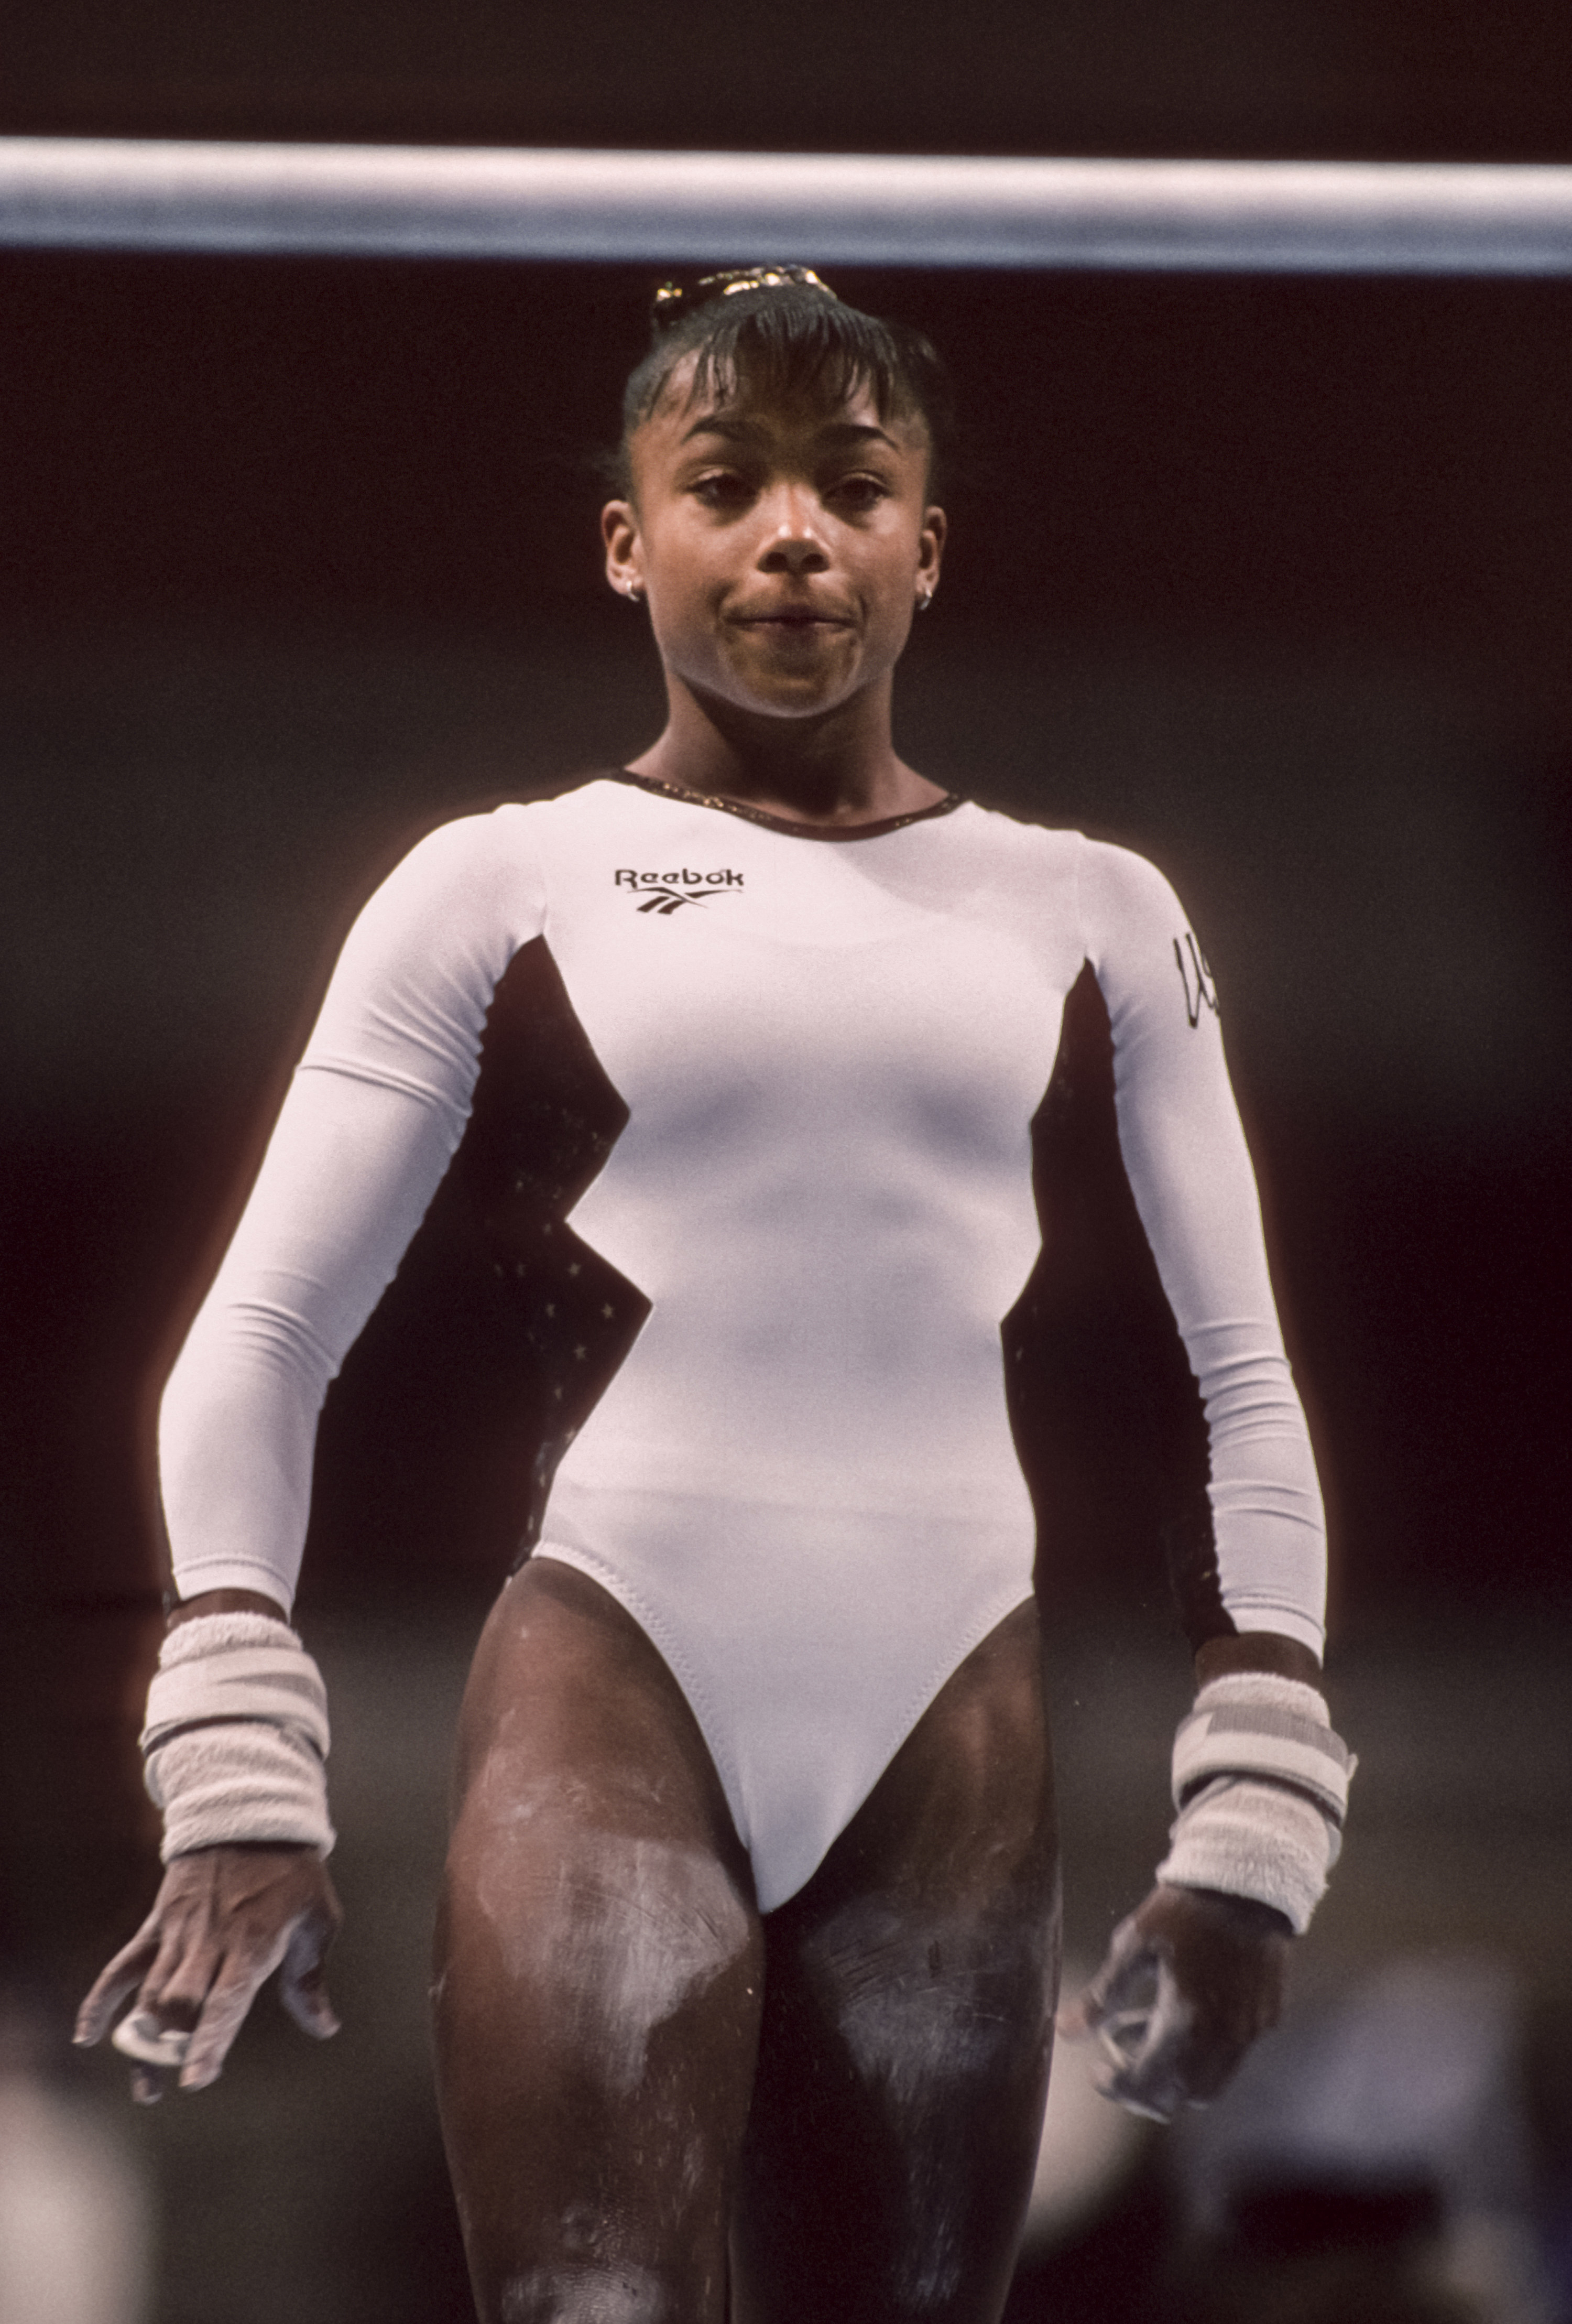 Dominique Dawes gets ready for her gymnastics performance